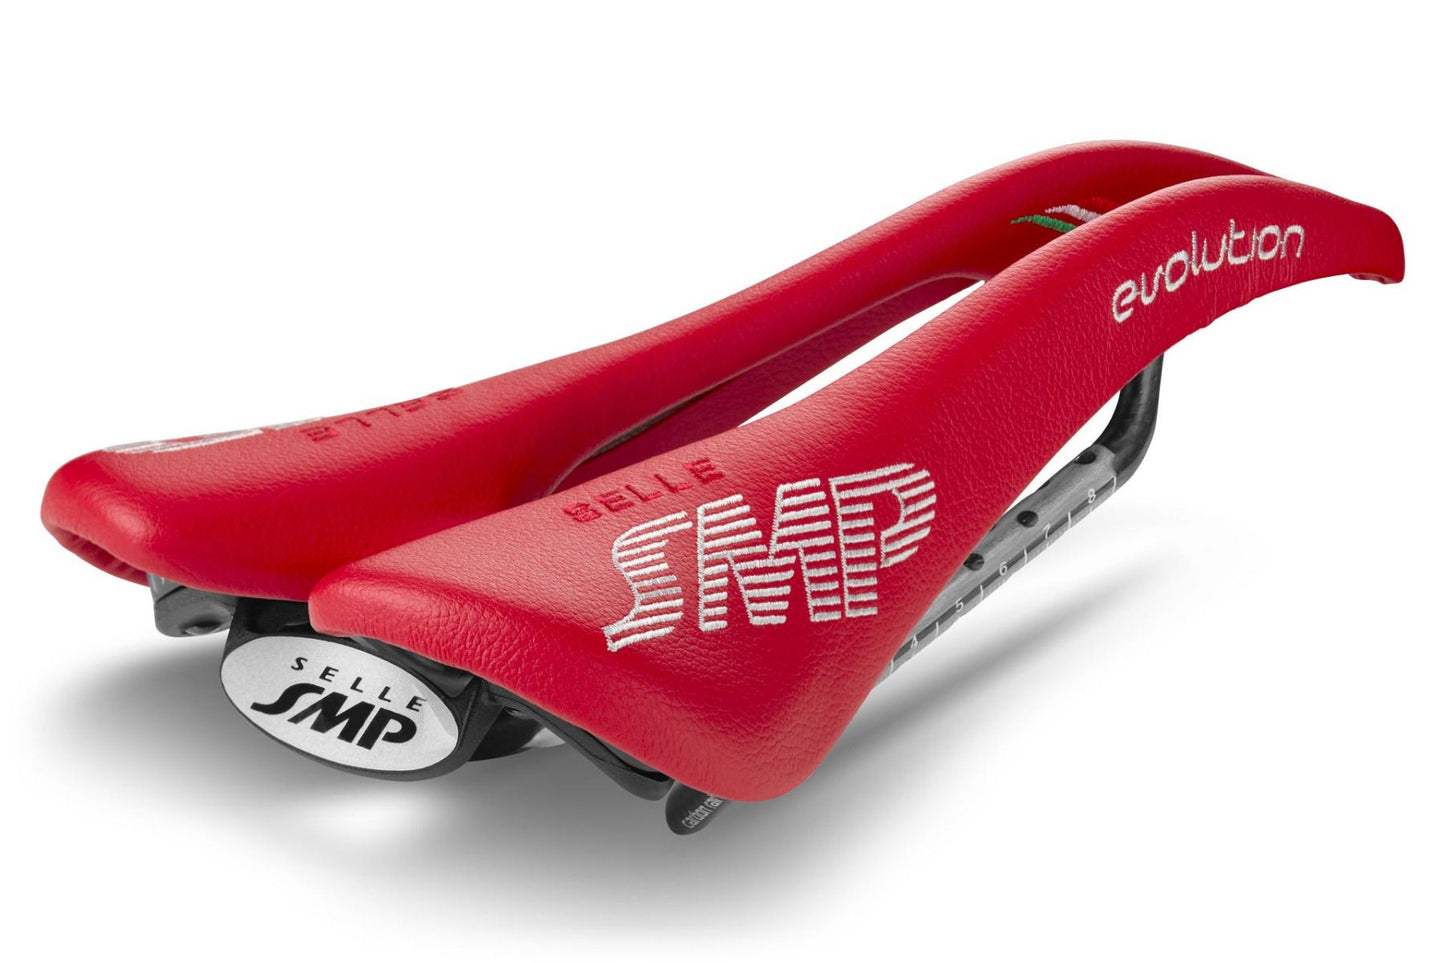 Selle SMP Evolution Saddle with Carbon Rails (Red)